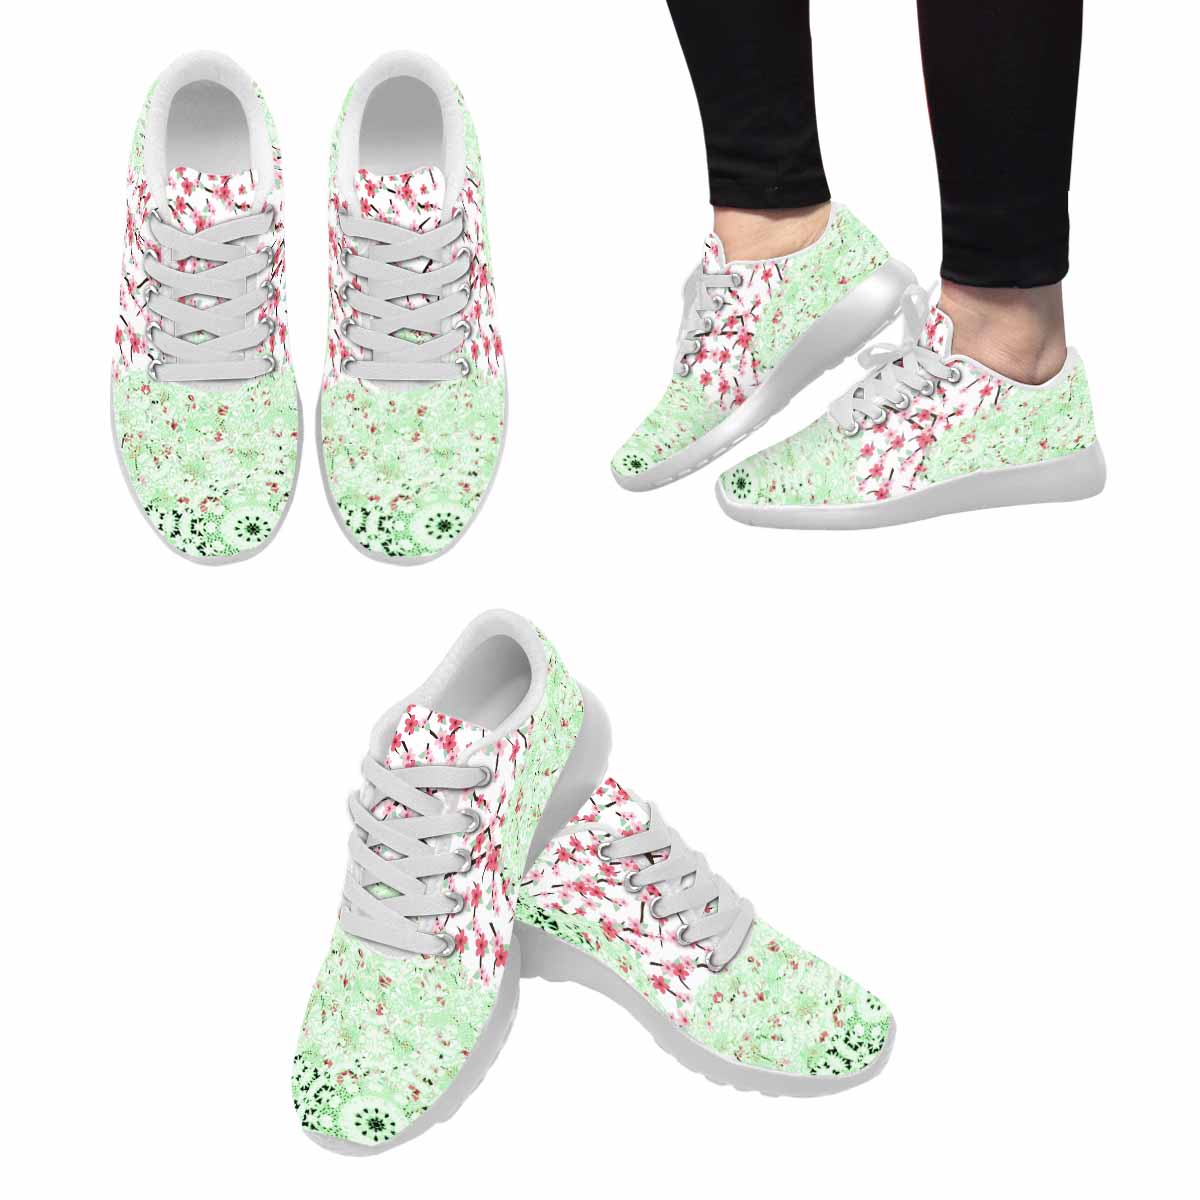 Victorian lace print, womens cute casual or running sneakers, design 10